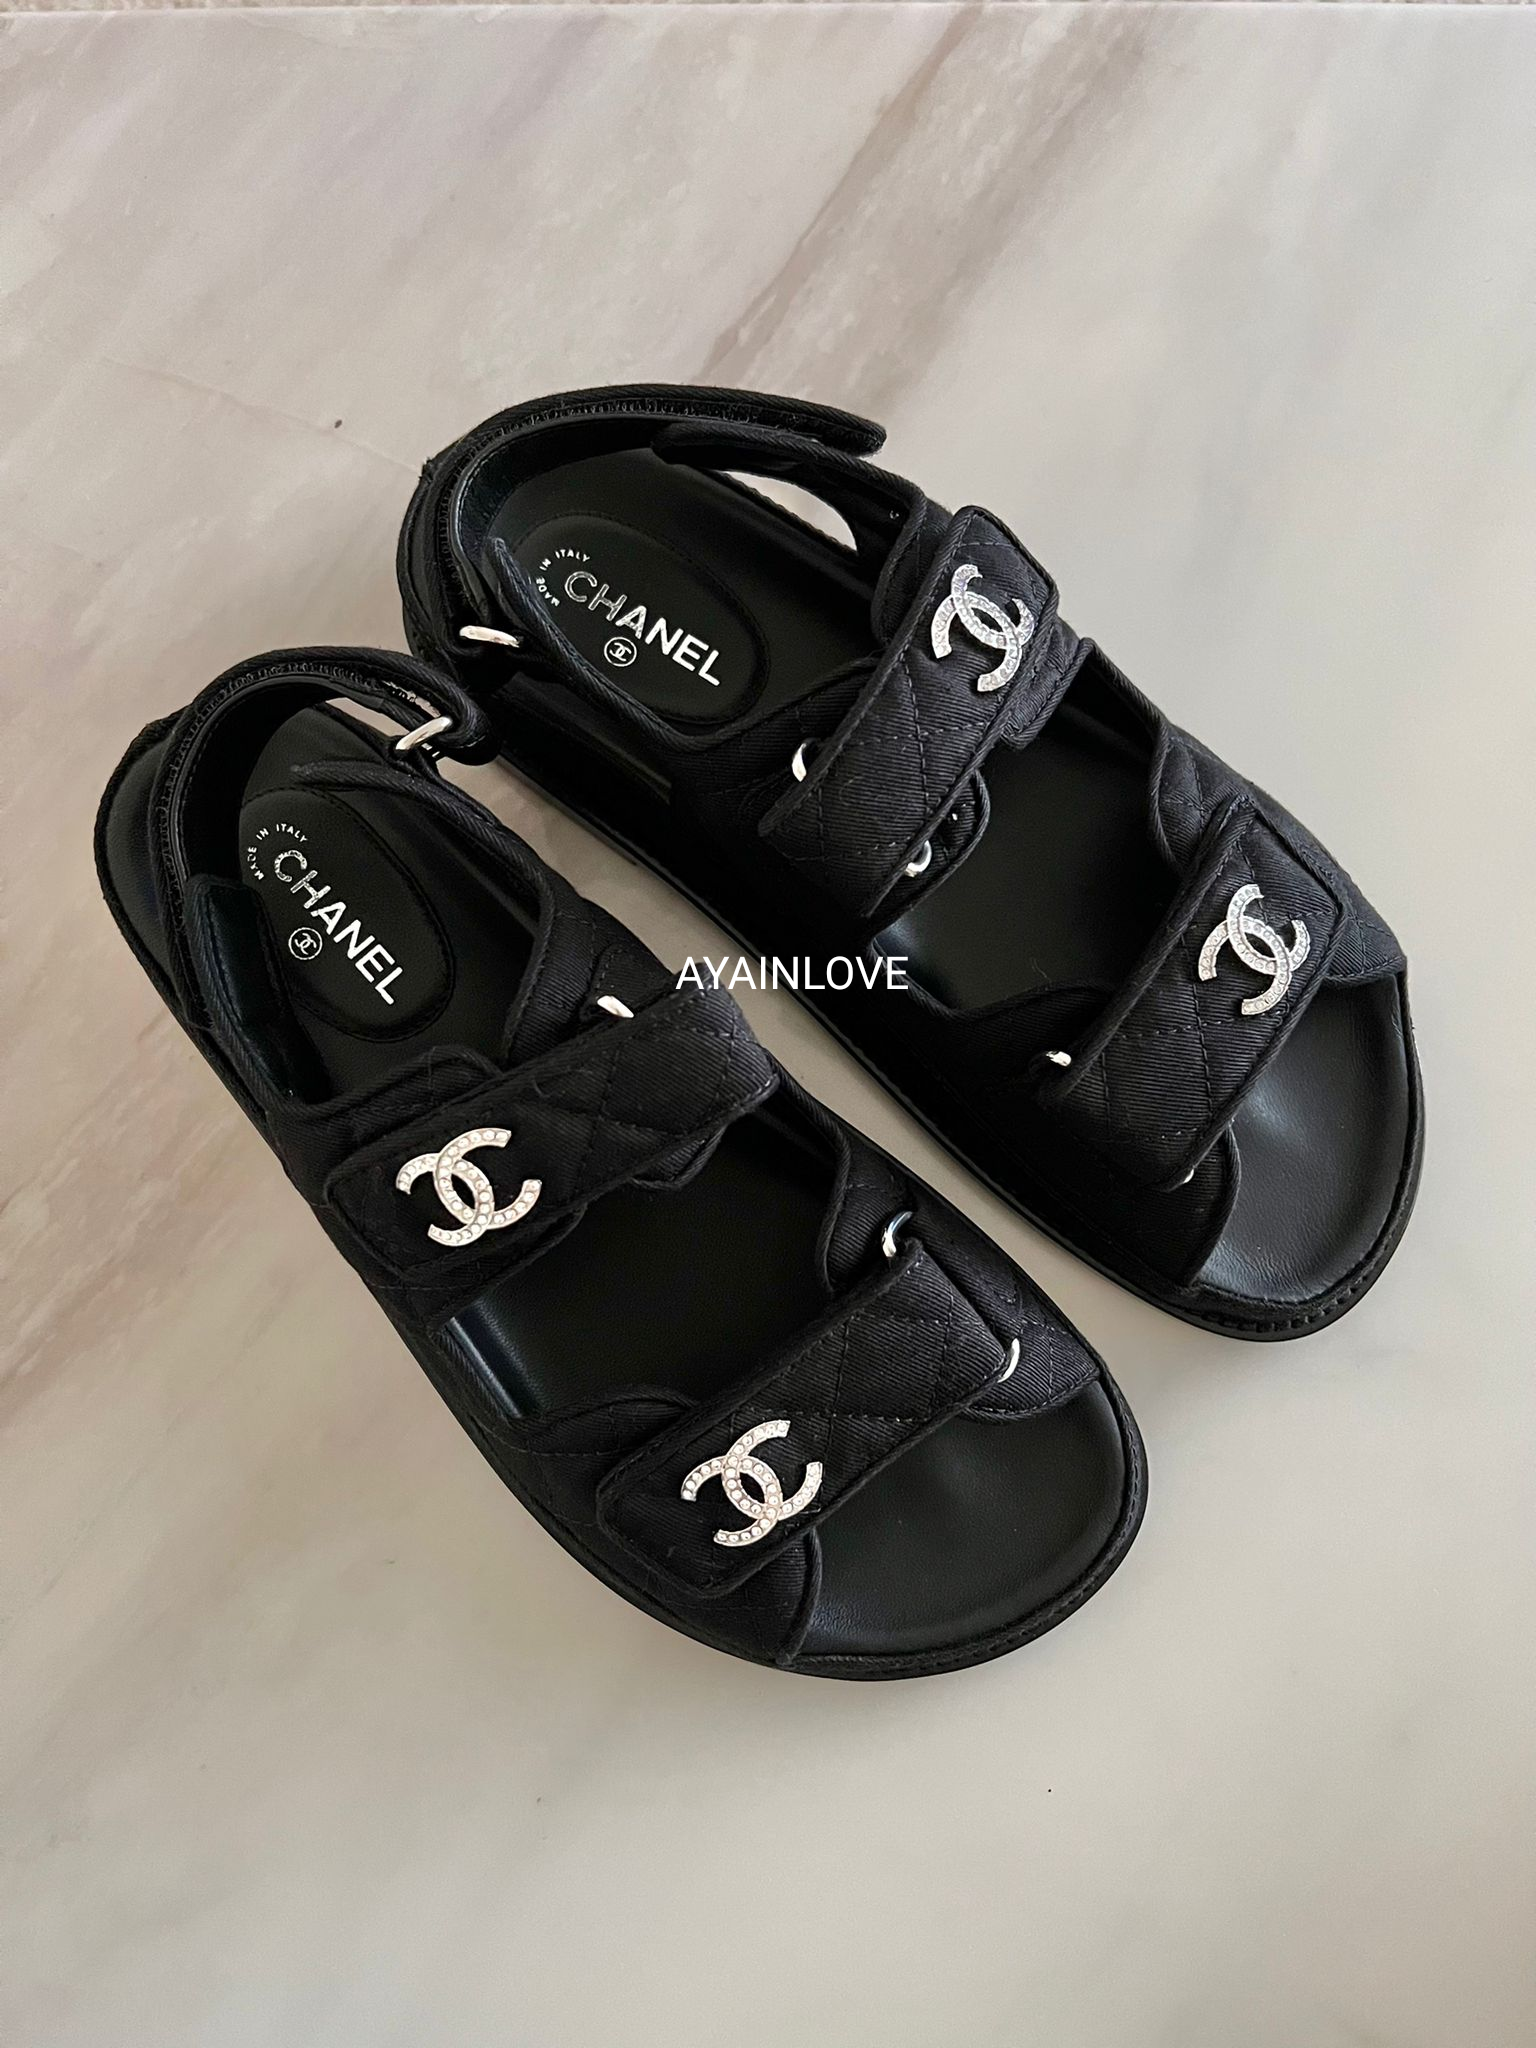 Dad sandals leather sandals Chanel Gold size 37 EU in Leather